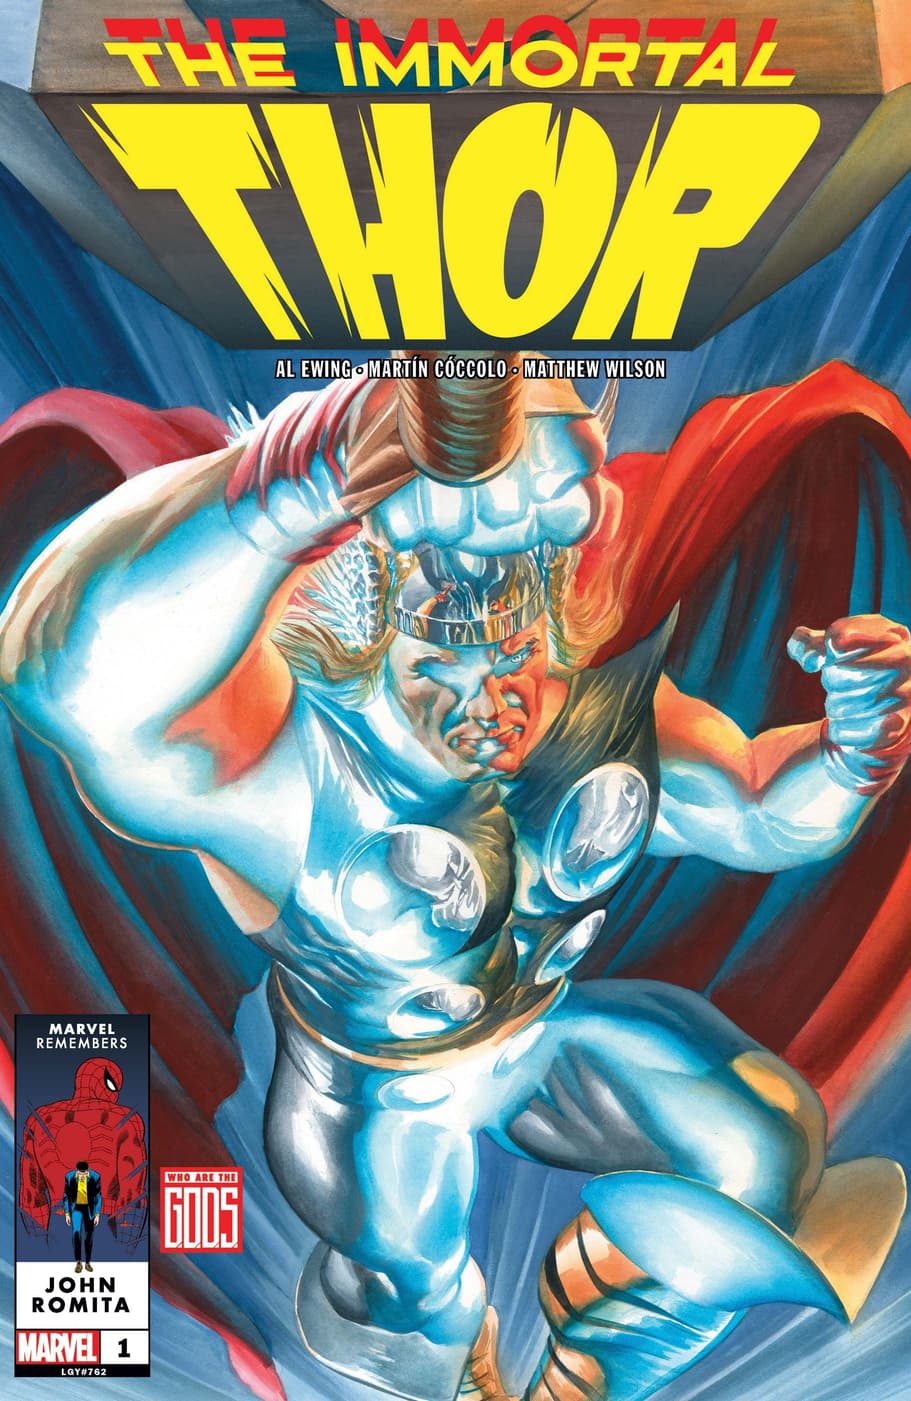 IMMORTAL THOR (2023) #1 cover by Alex Ross